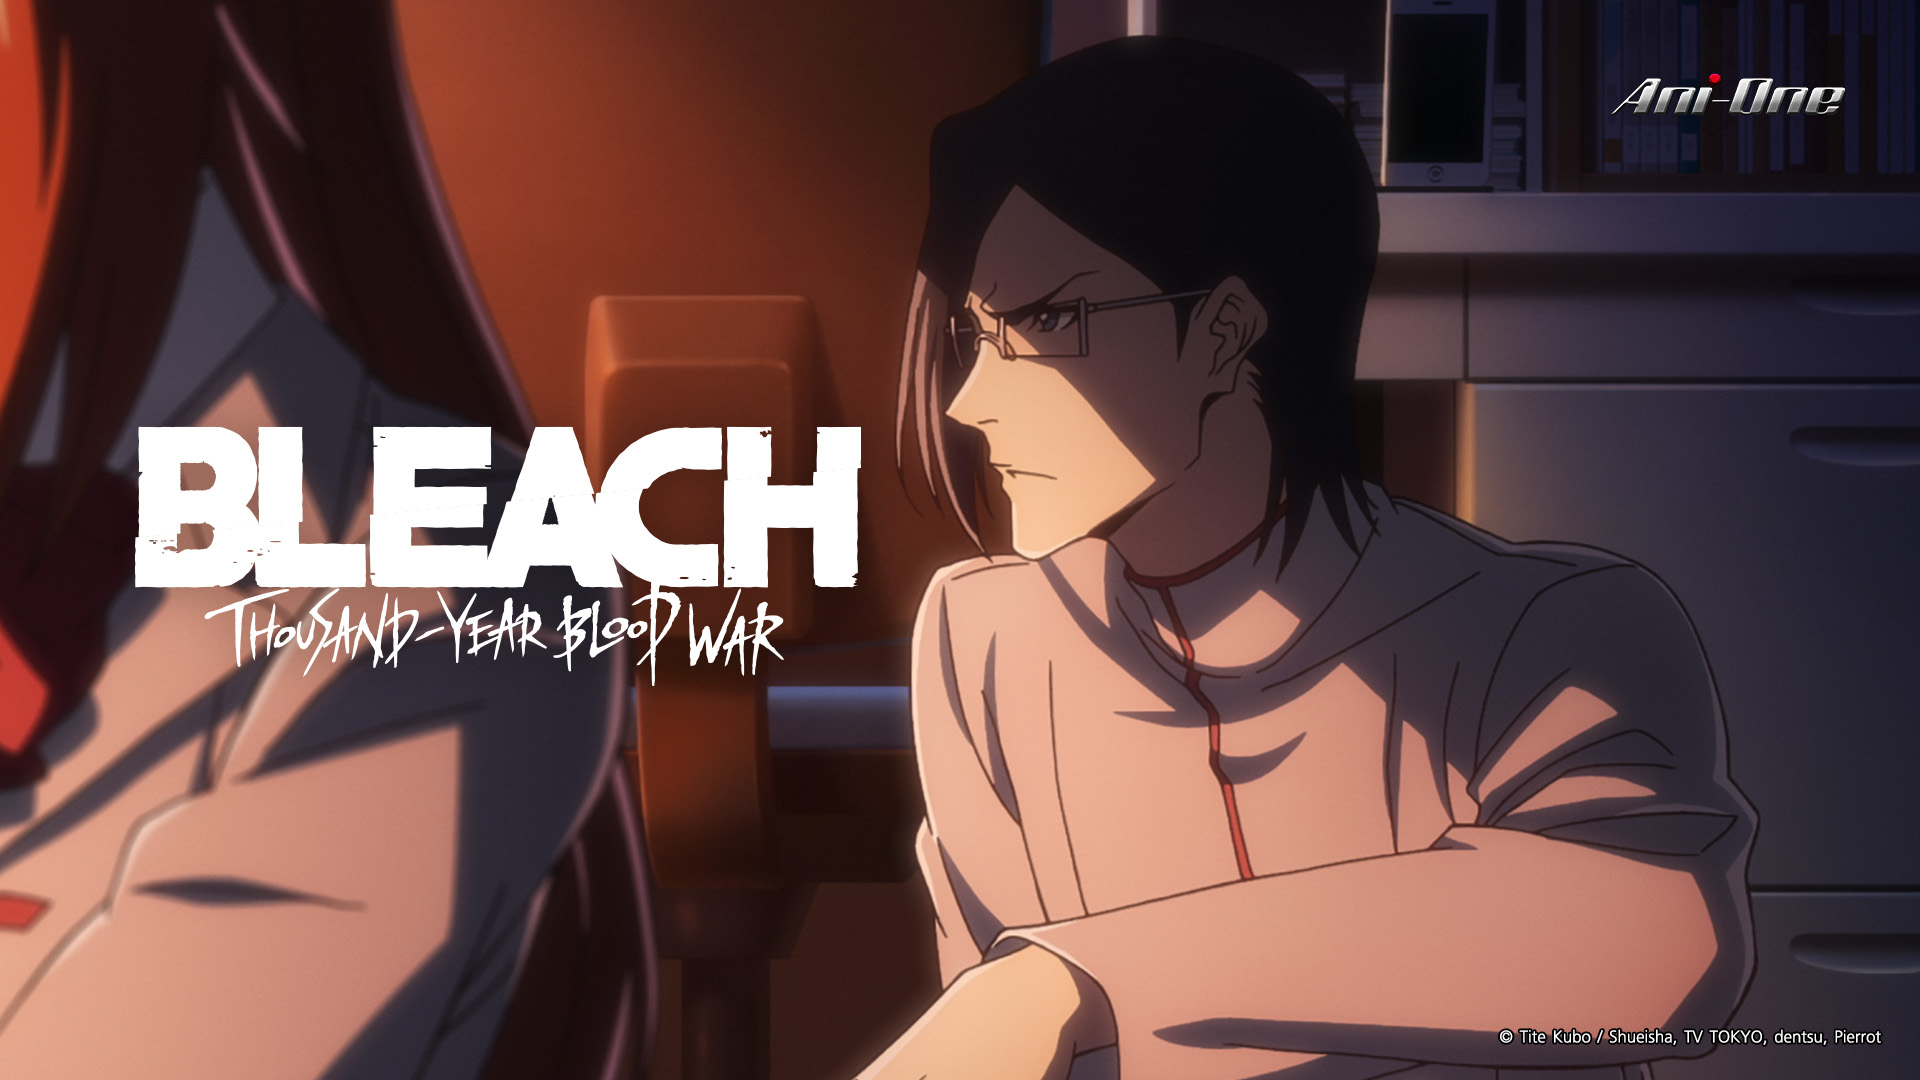 How To Watch Bleach On Netflix From The US (All Seasons)